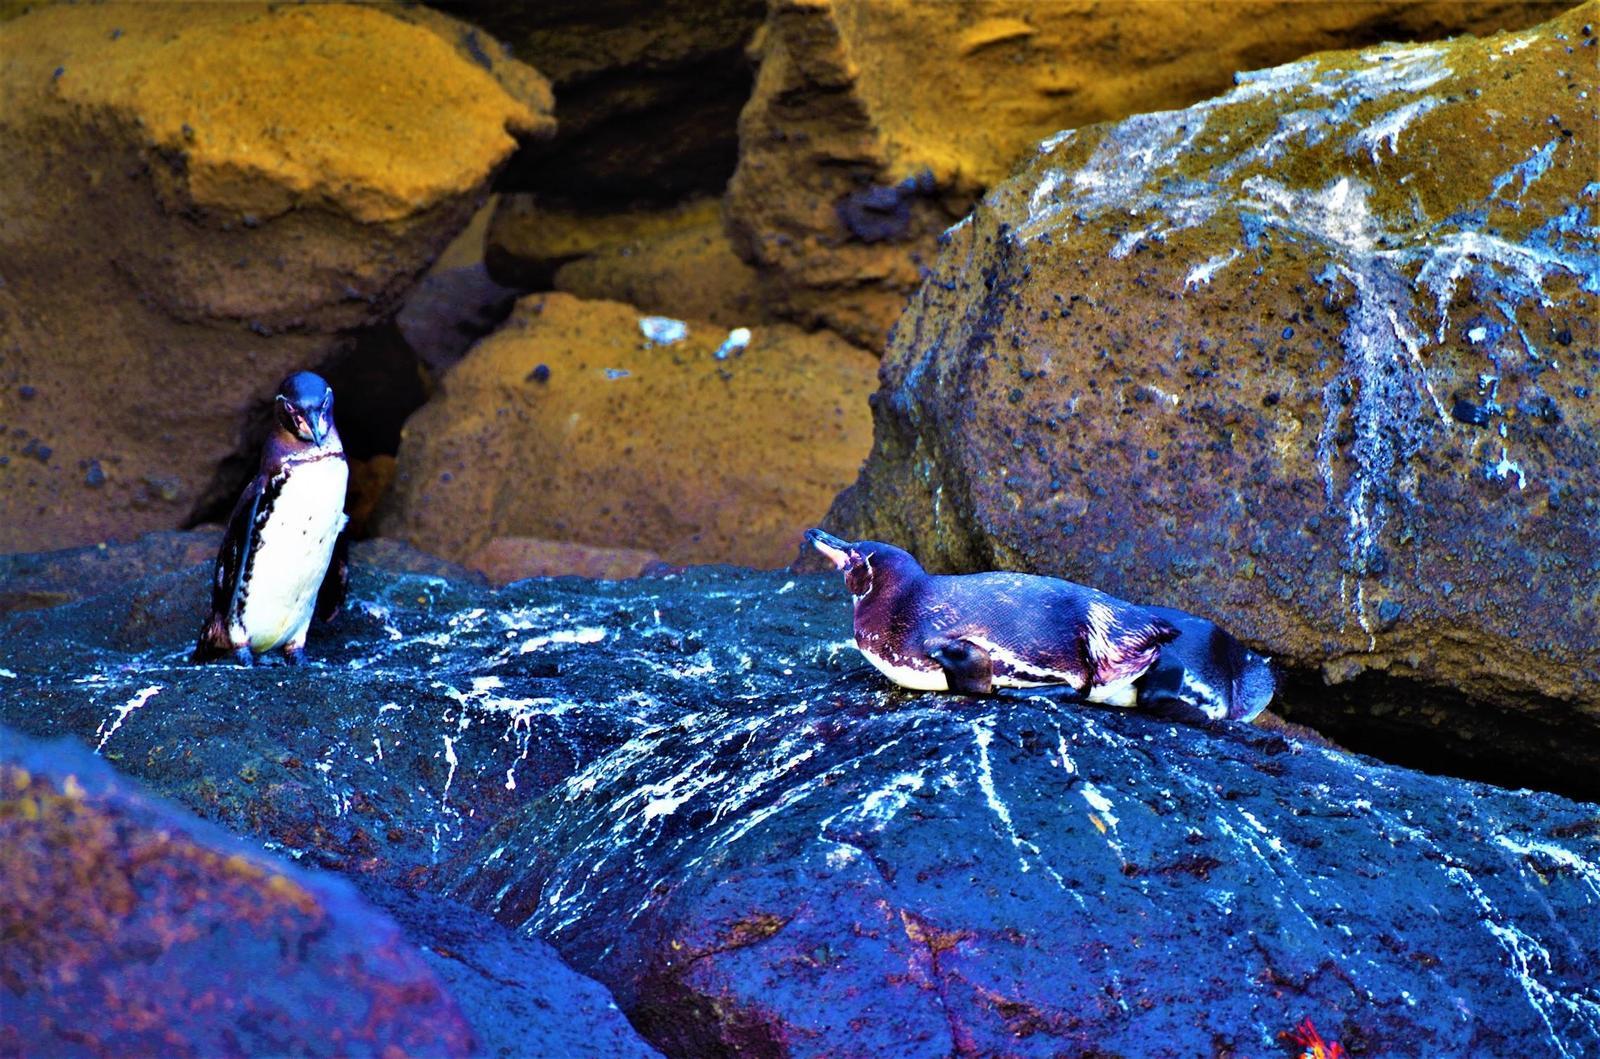 Galapagos Penguin Photo by Alicia Thatcher